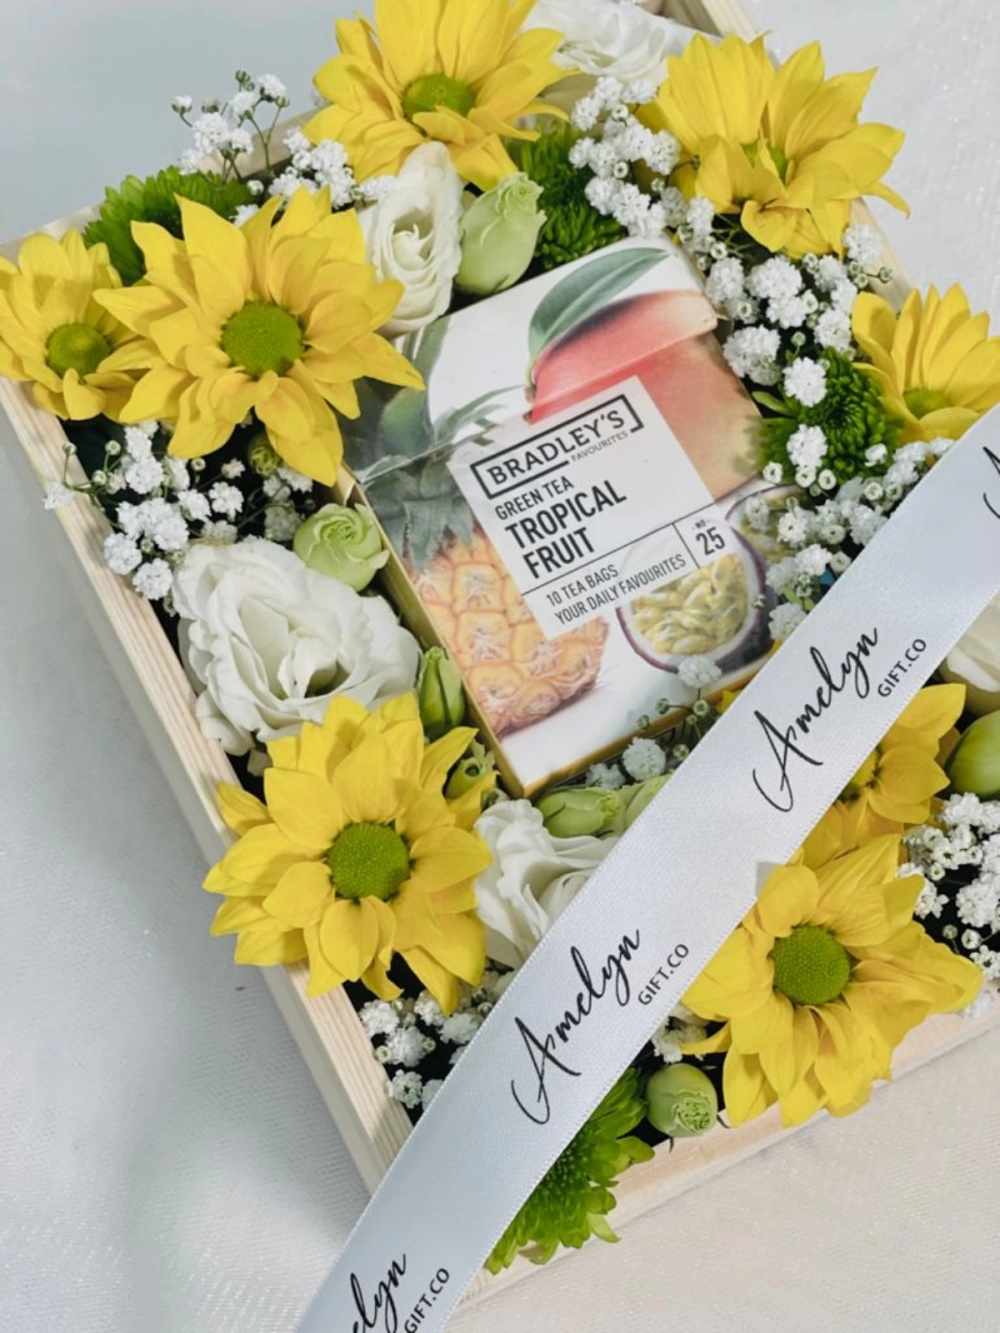 Premium Tropical Fruit Tea with Flowers in Wooden Box